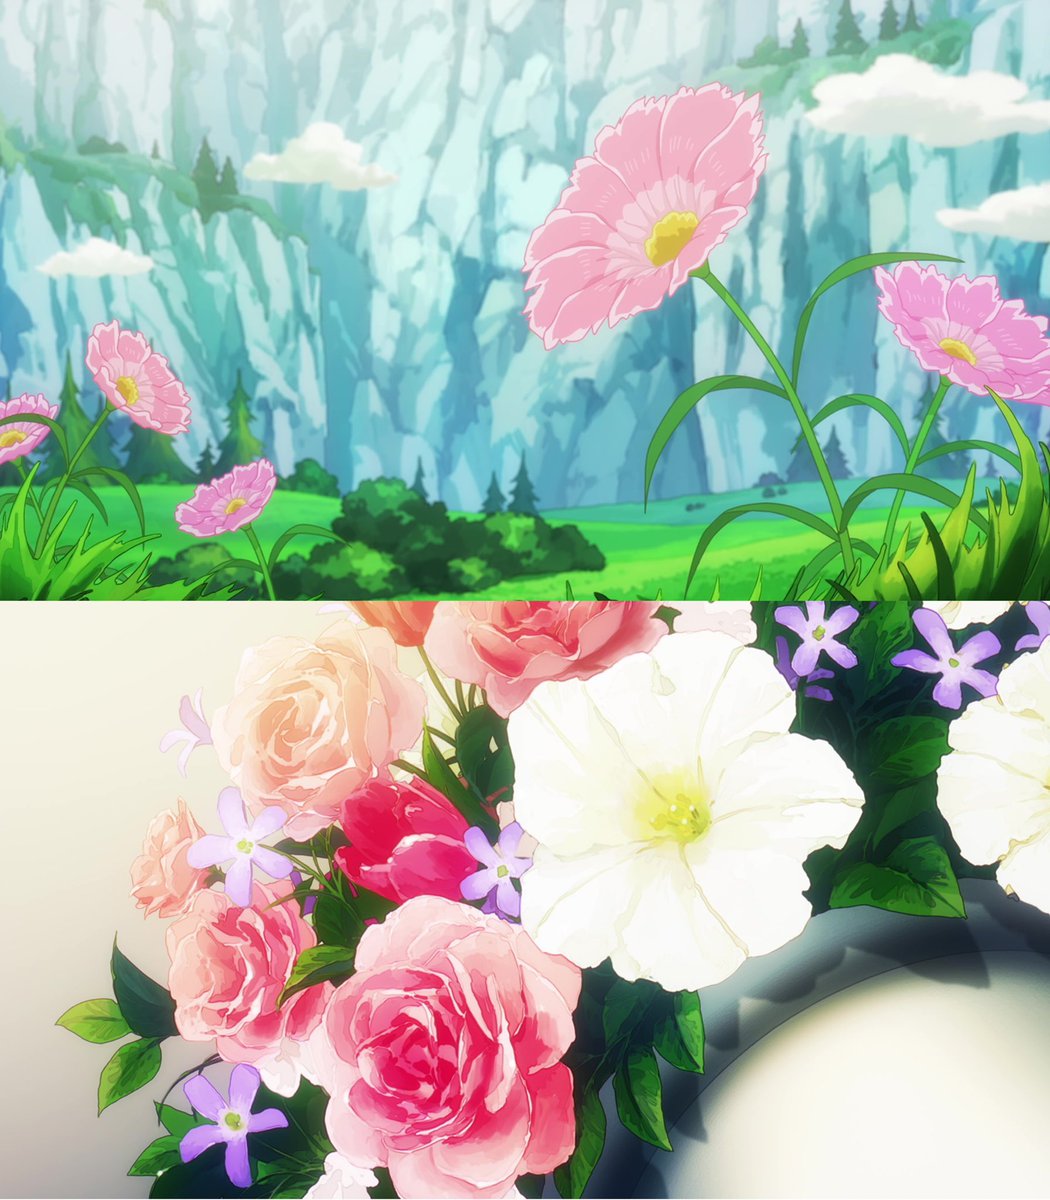 #ONEPIECE1105 Besides Luffy, these were my favorite shots of the recent episode. 😍🌸💐🌺🌹 Gorgeous flowers. 🥰🌸💐🌺🌹